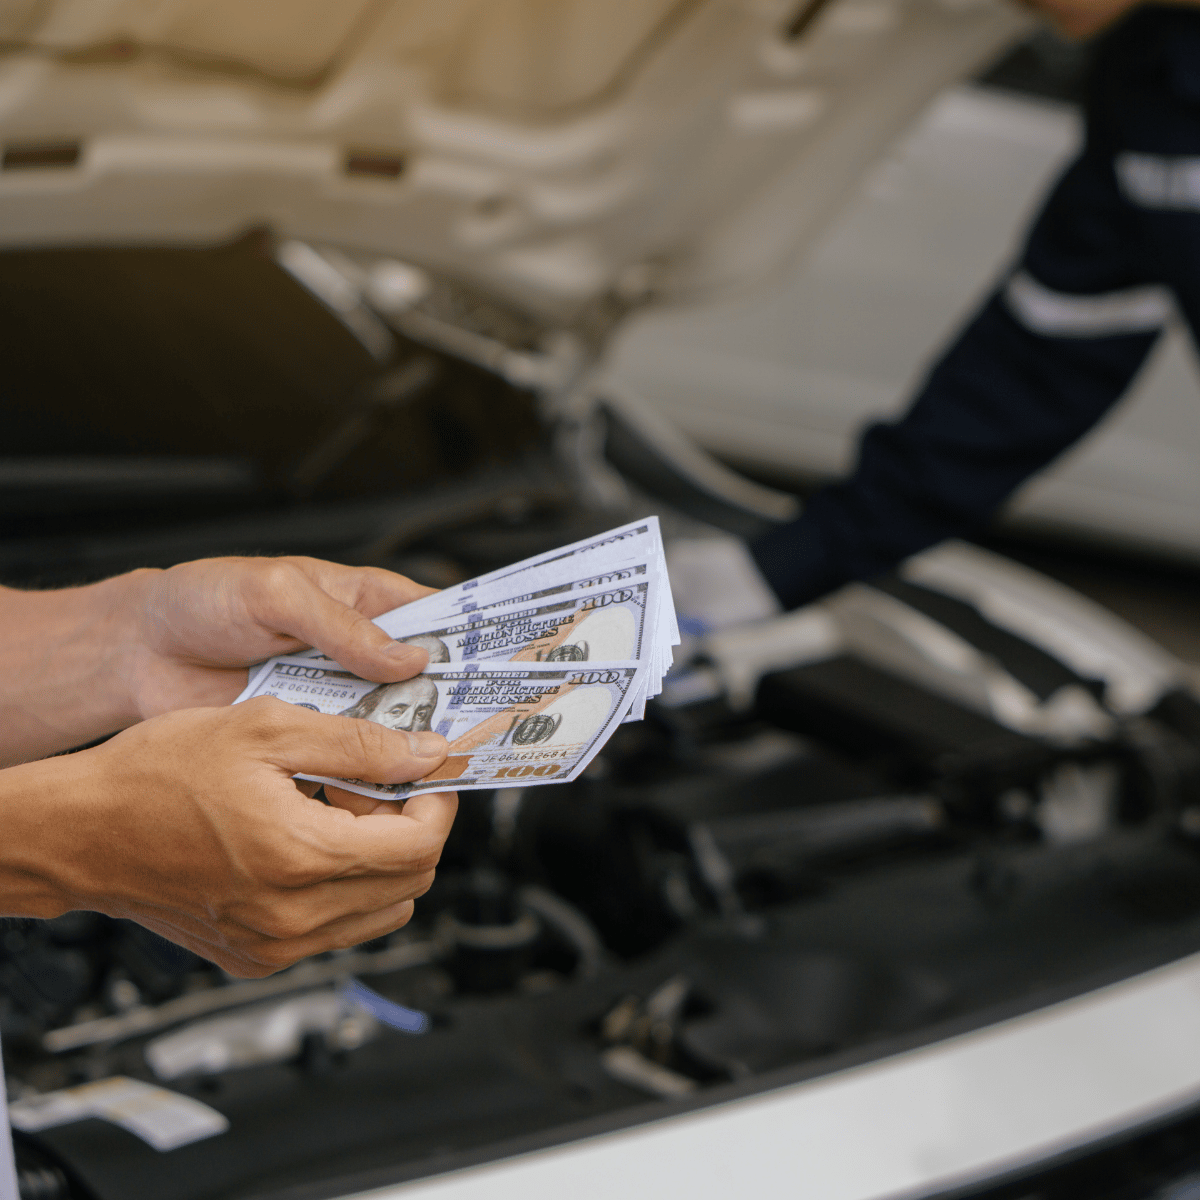 Image of a hand holding several dollar bills, with a mechanic checking a car with hood up in the background.